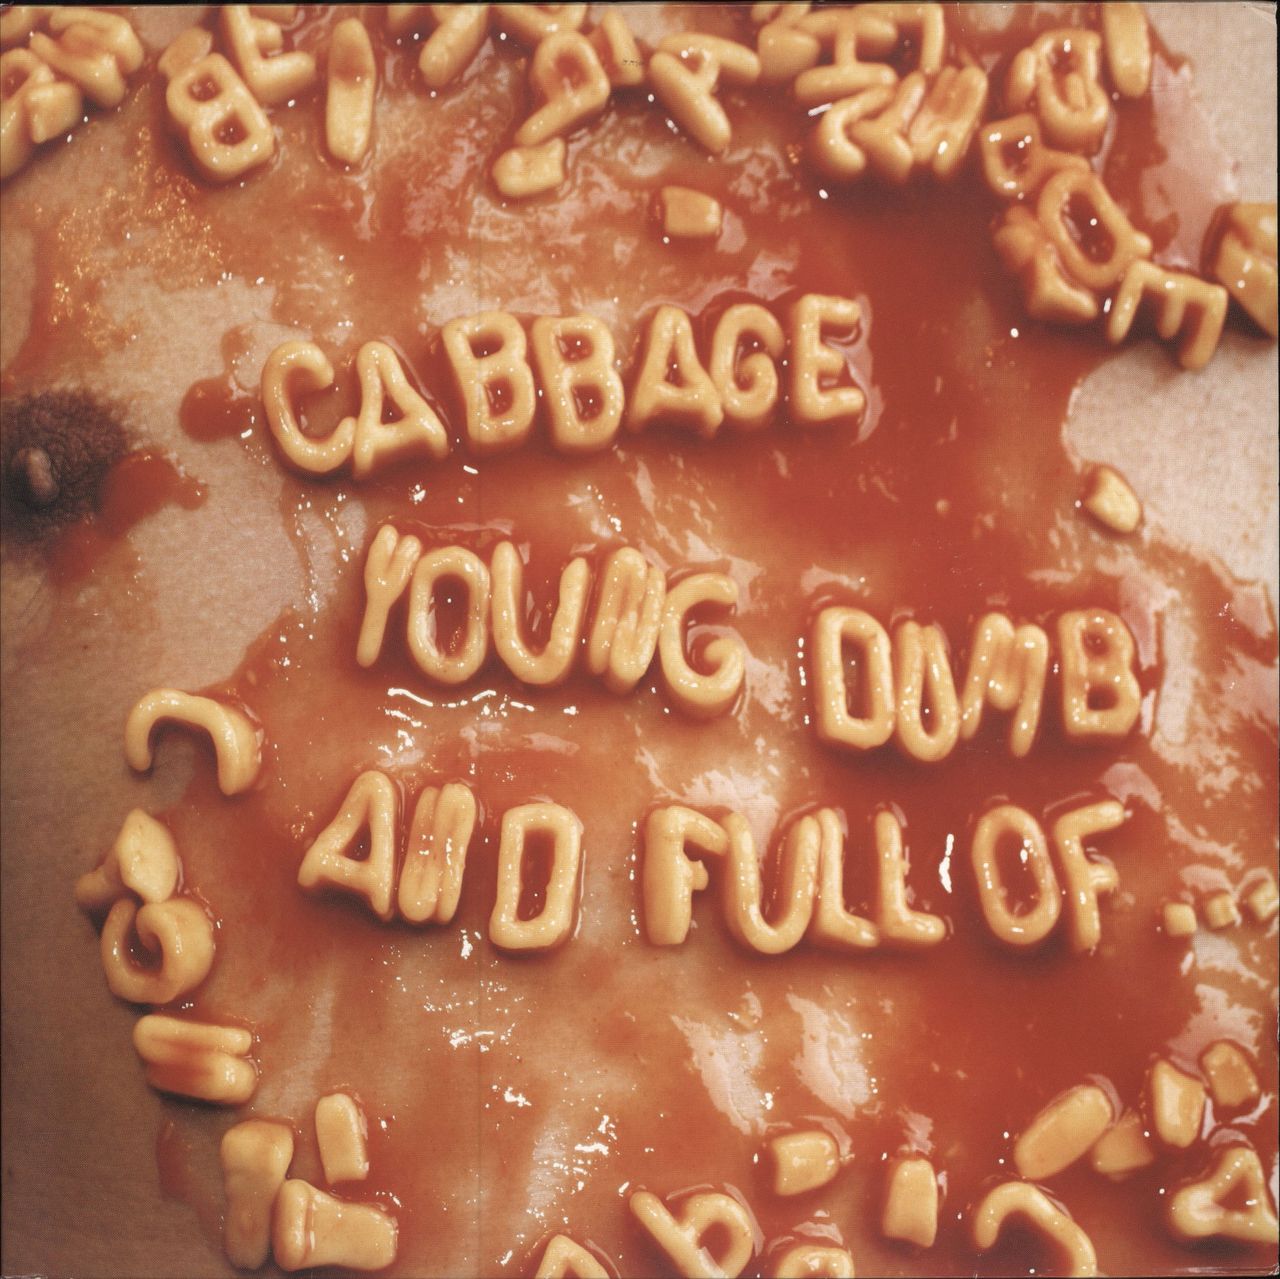 Cabbage Young Dumb And Full Of... UK 2-LP vinyl record set (Double LP Album) 538313060